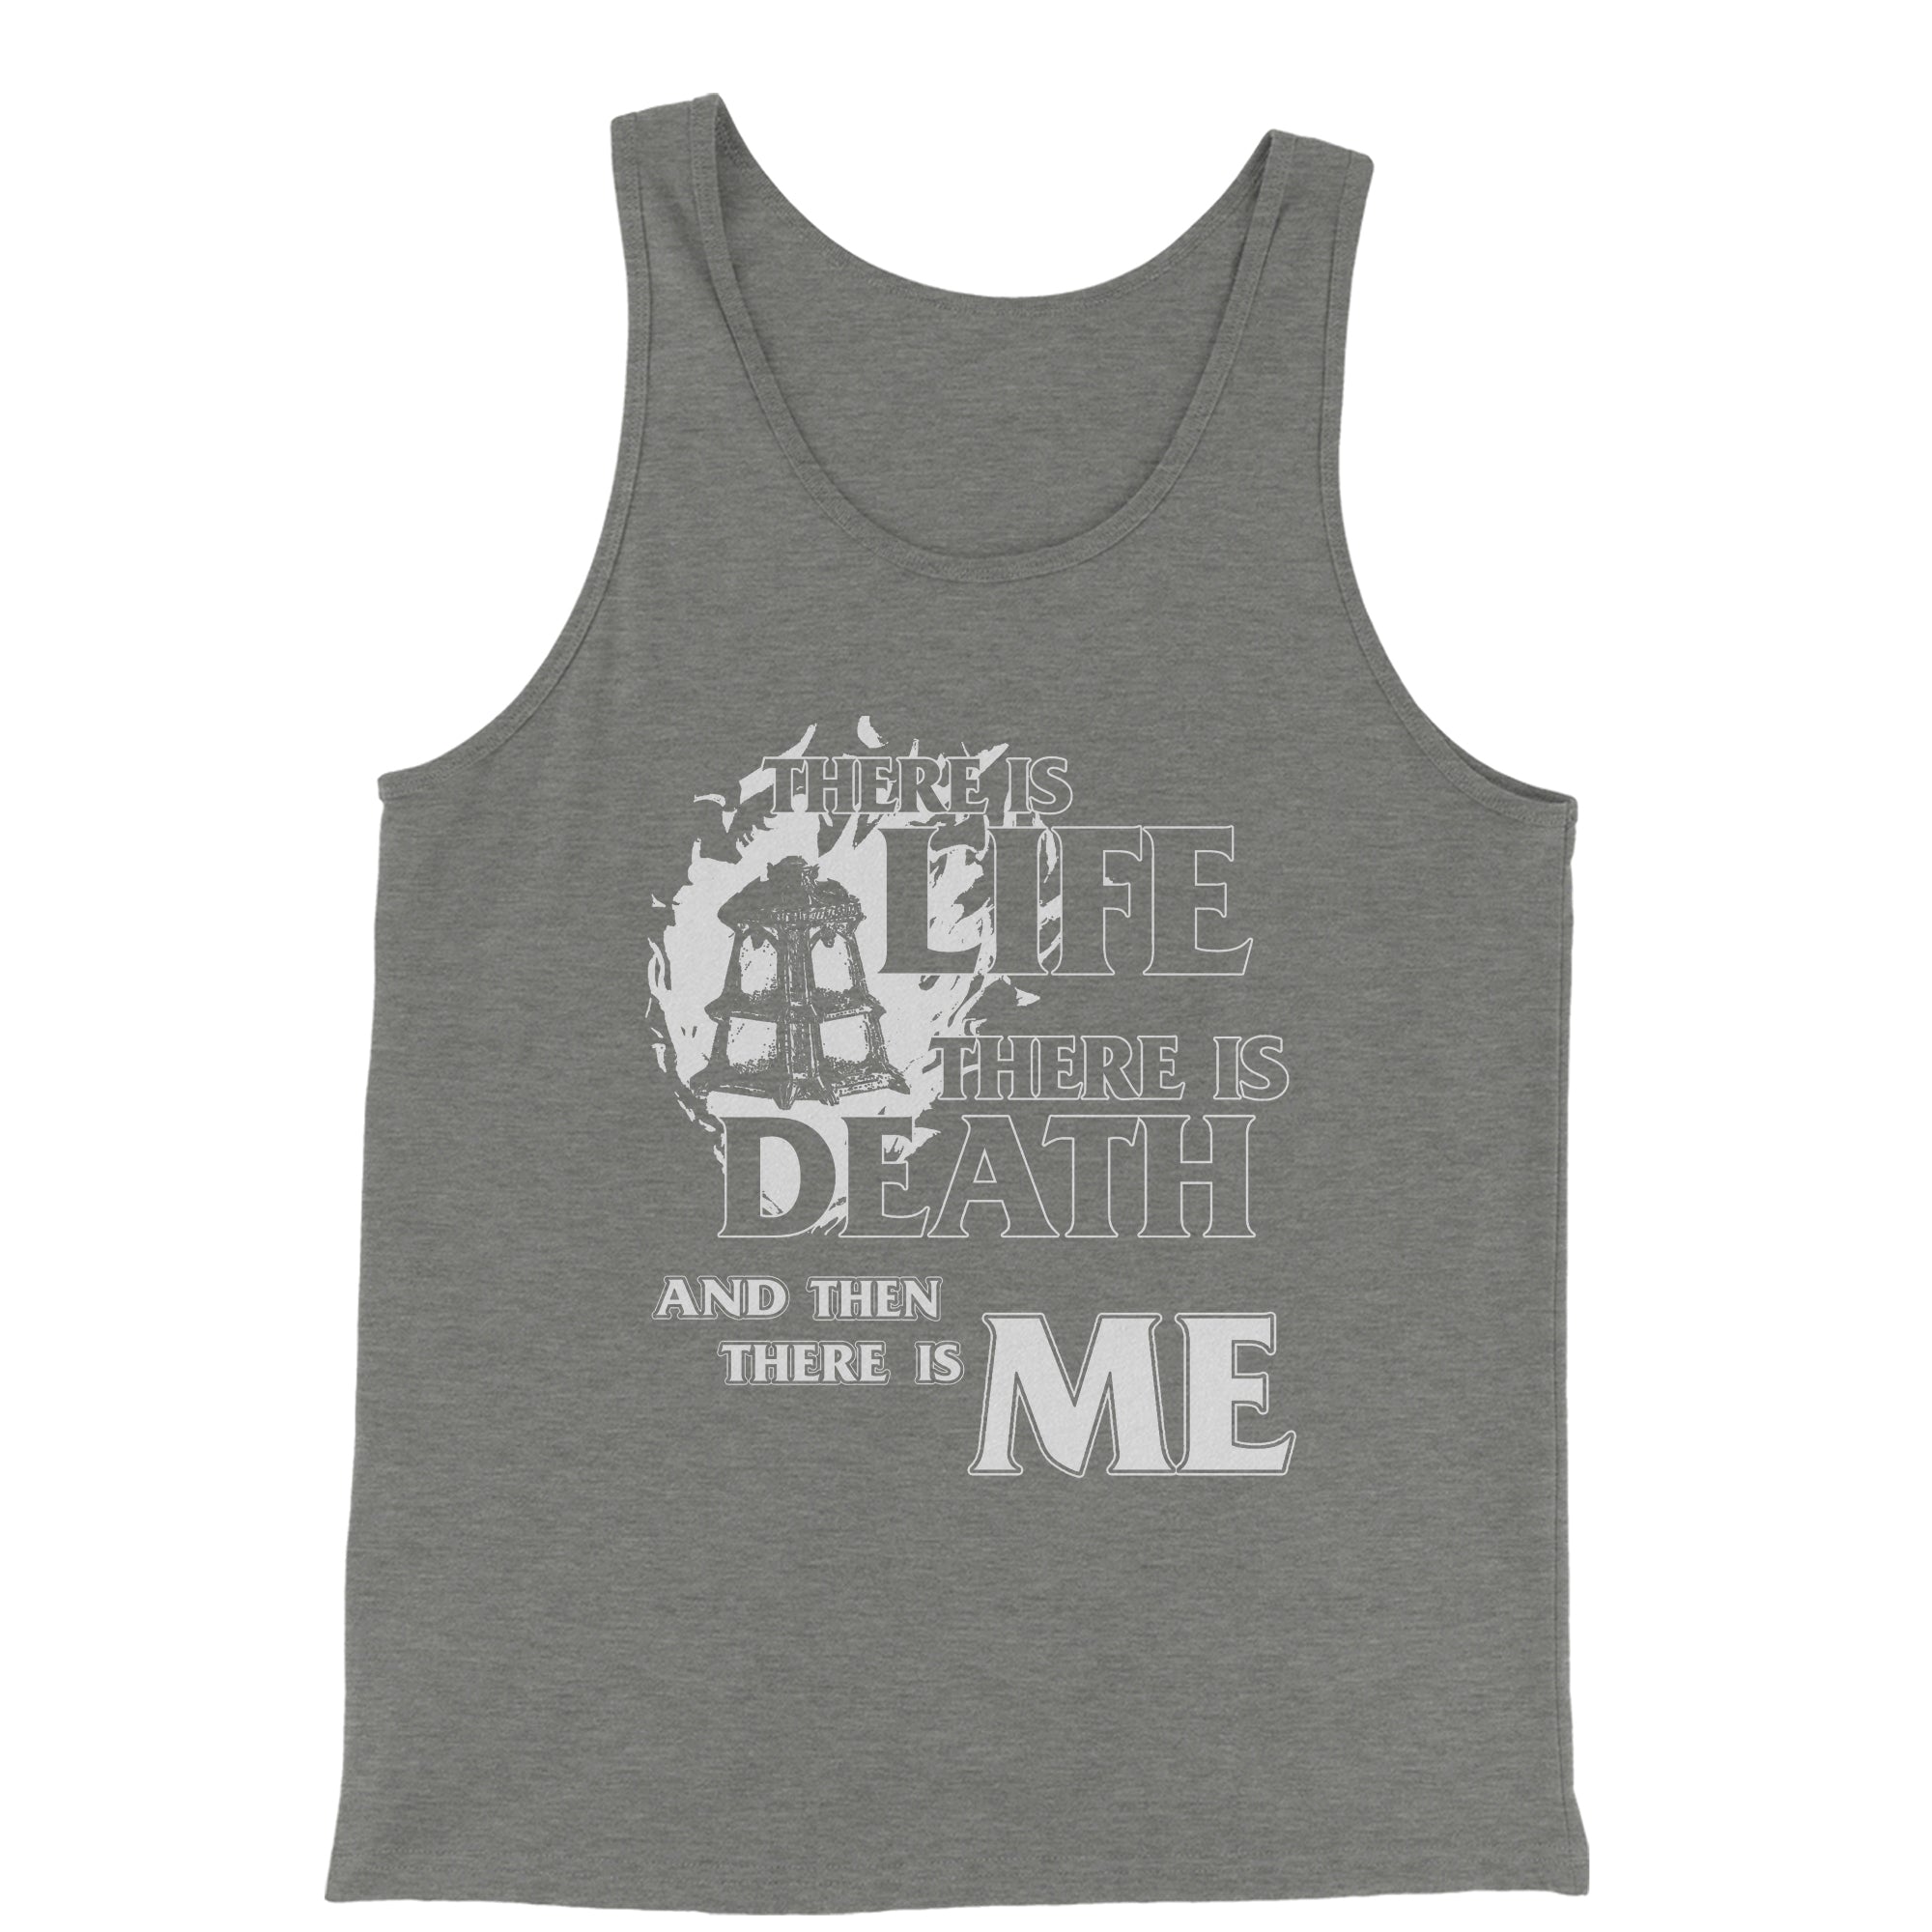 There is Life Death Me League Champion Threshold Quote Men's Jersey Tank